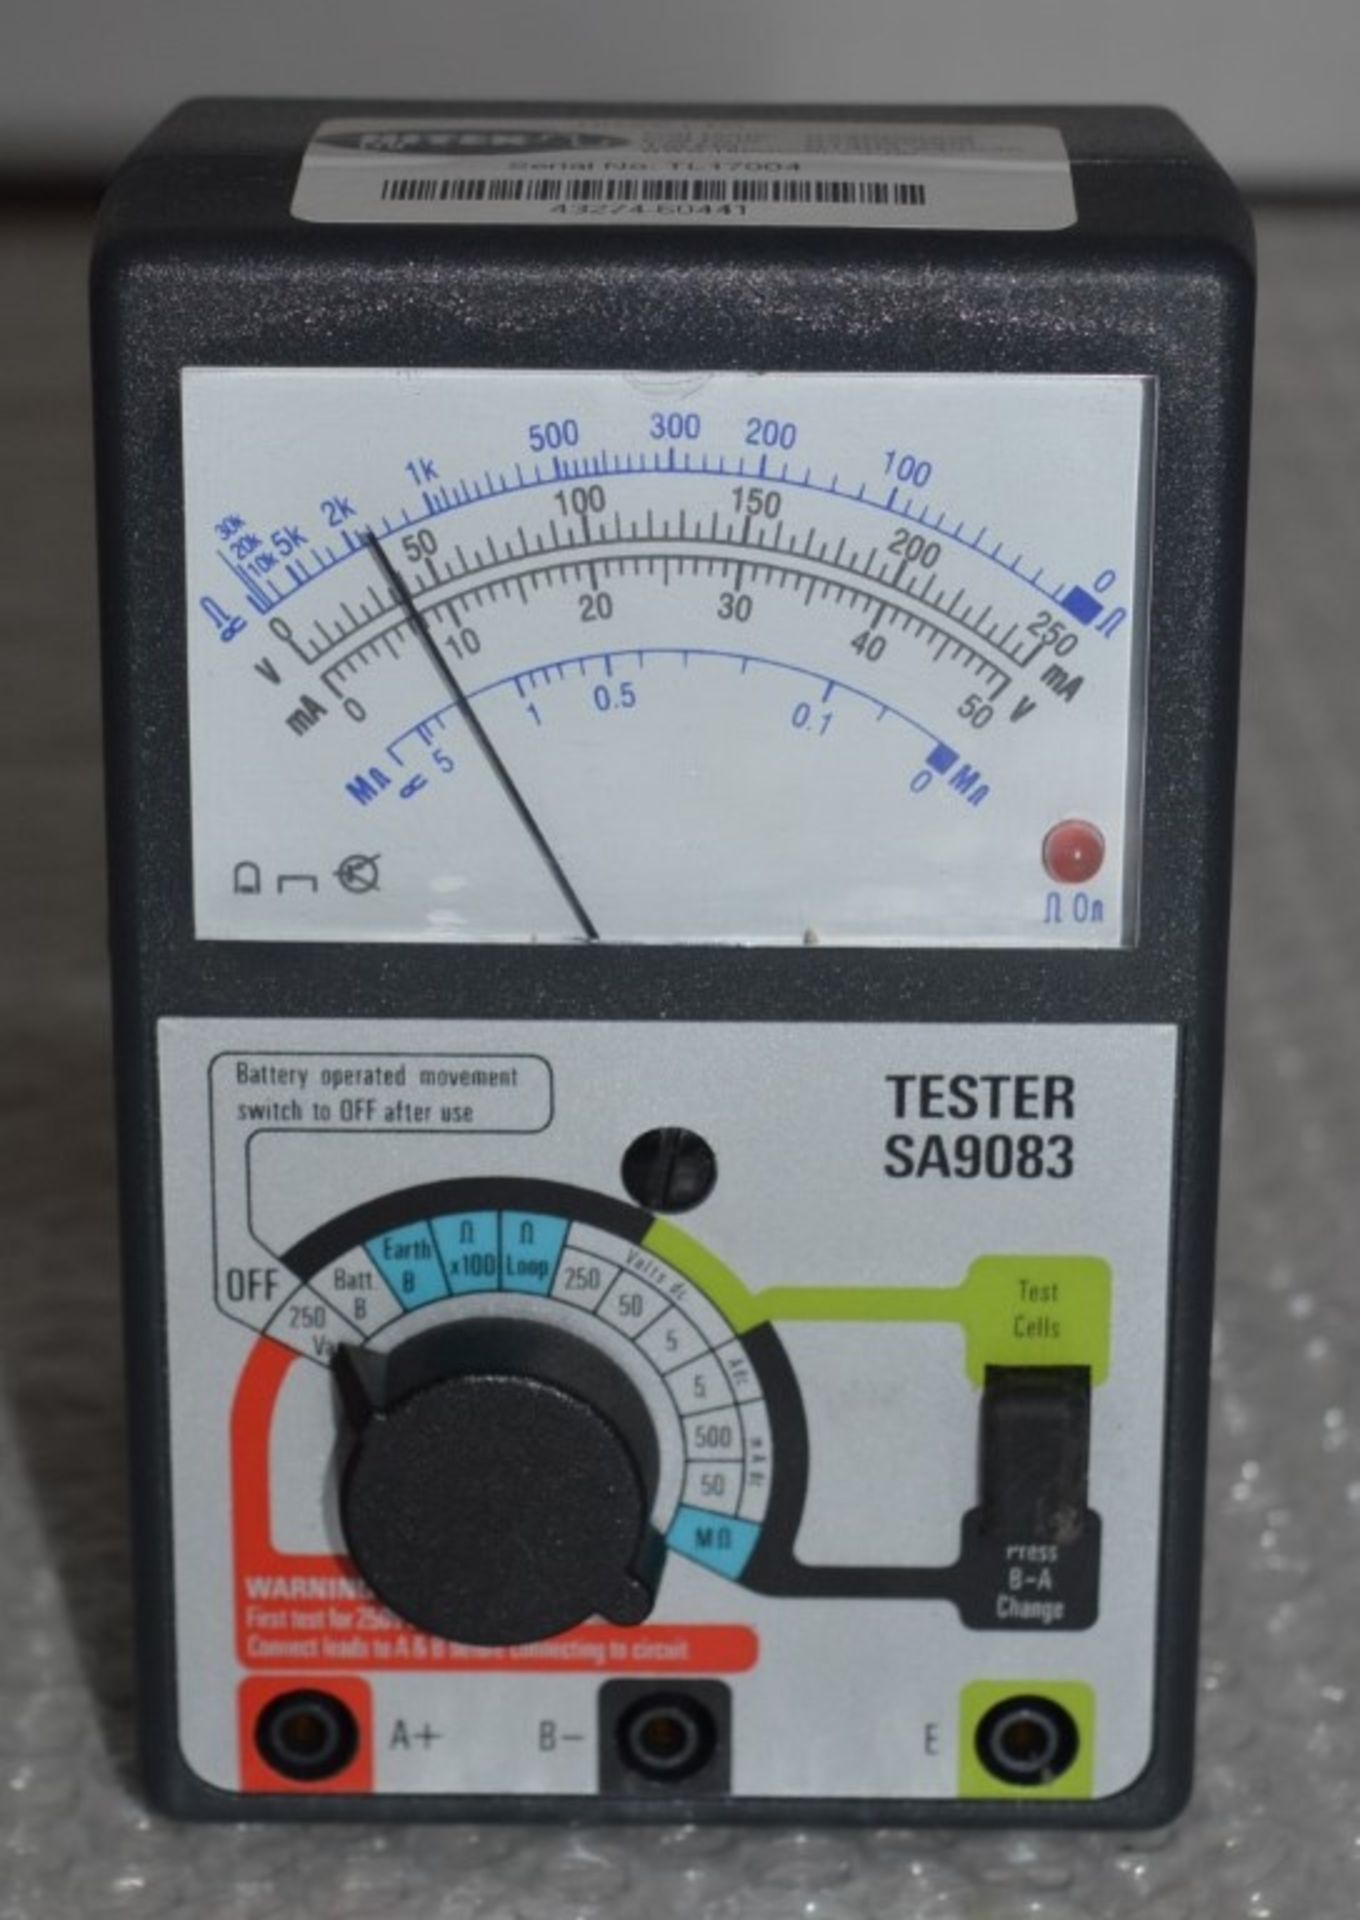 1 x Mills SA9083 Multimeter - Suitable For Telephone Engineers in Maintenance Testing - With Carry - Image 15 of 16